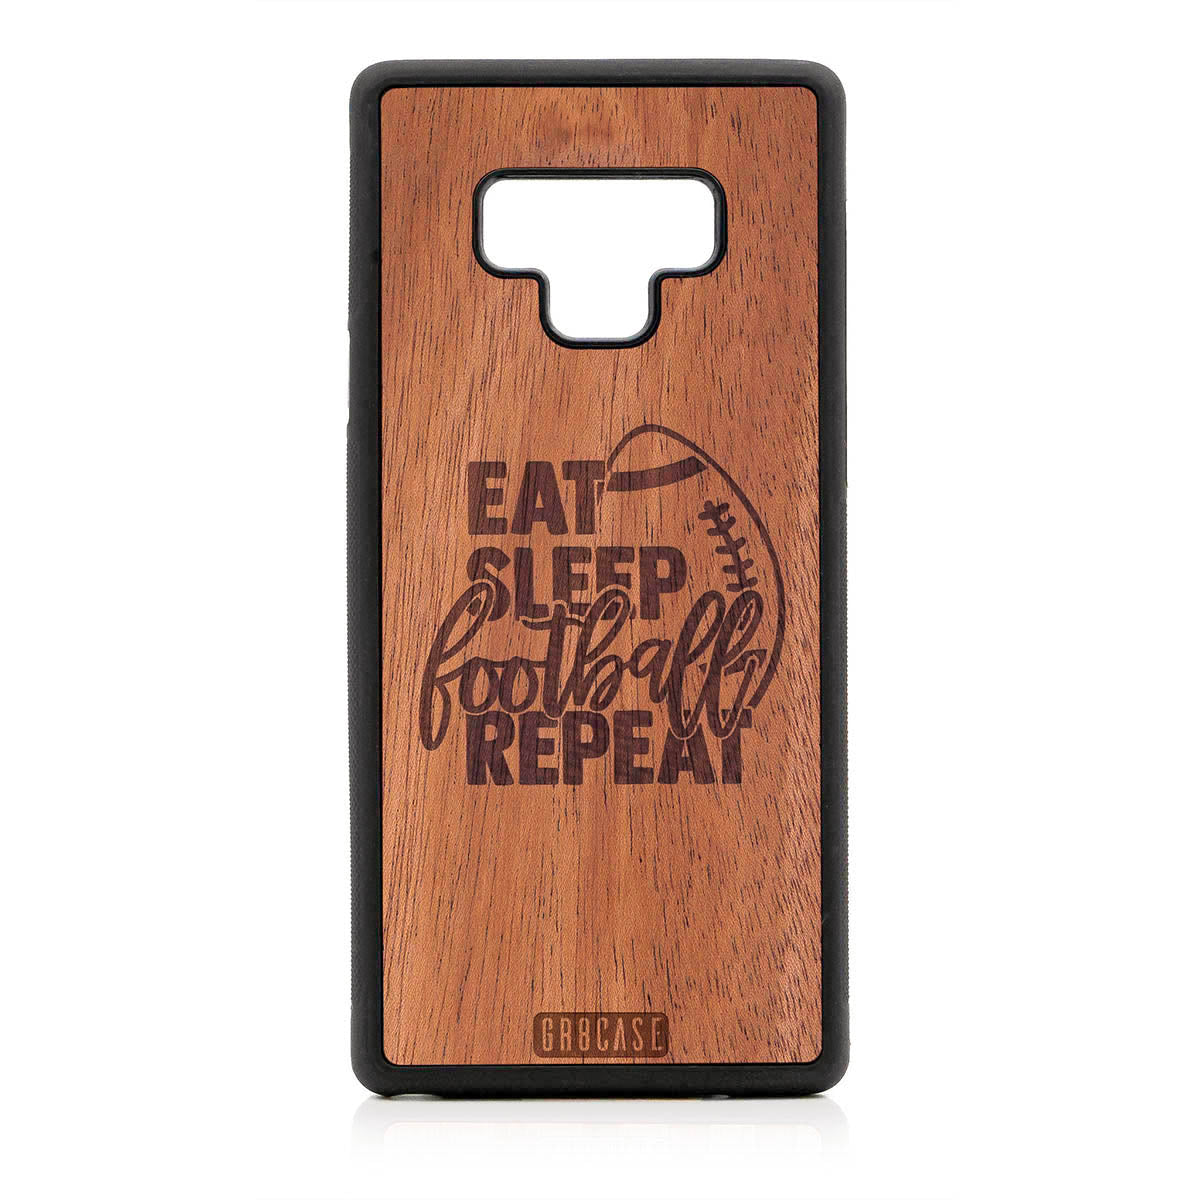 Eat Sleep Football Repeat Design Wood Case For Samsung Galaxy Note 9